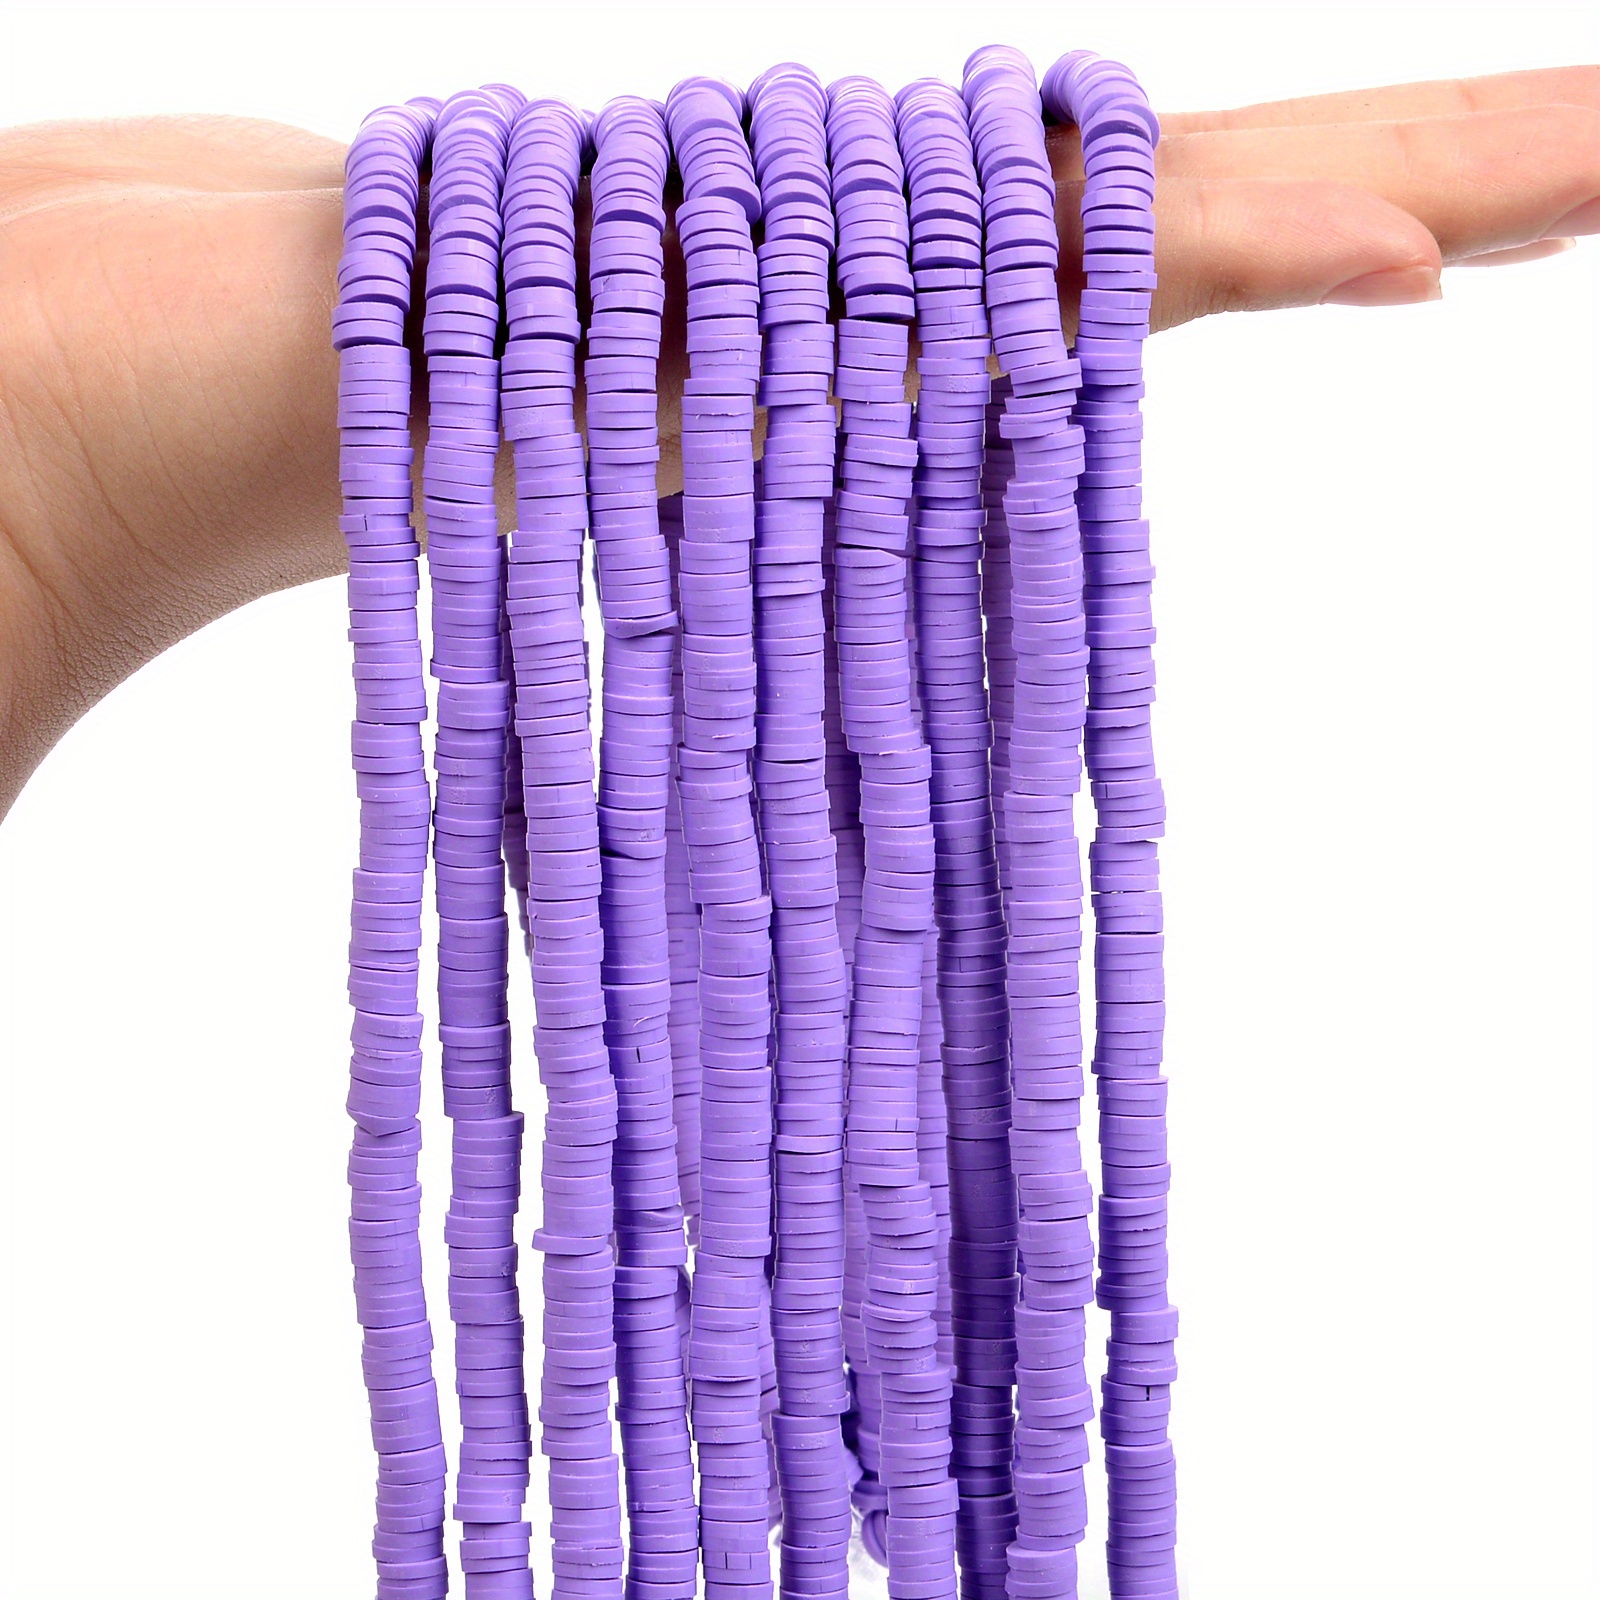  Purple Heishi Beads For Jewelry Making - 3000 Purple Polymer  Clay Beads For Bracelets Making - Purple Flat Beads Disc Beads 6mm Round  Disk Spacer Beads